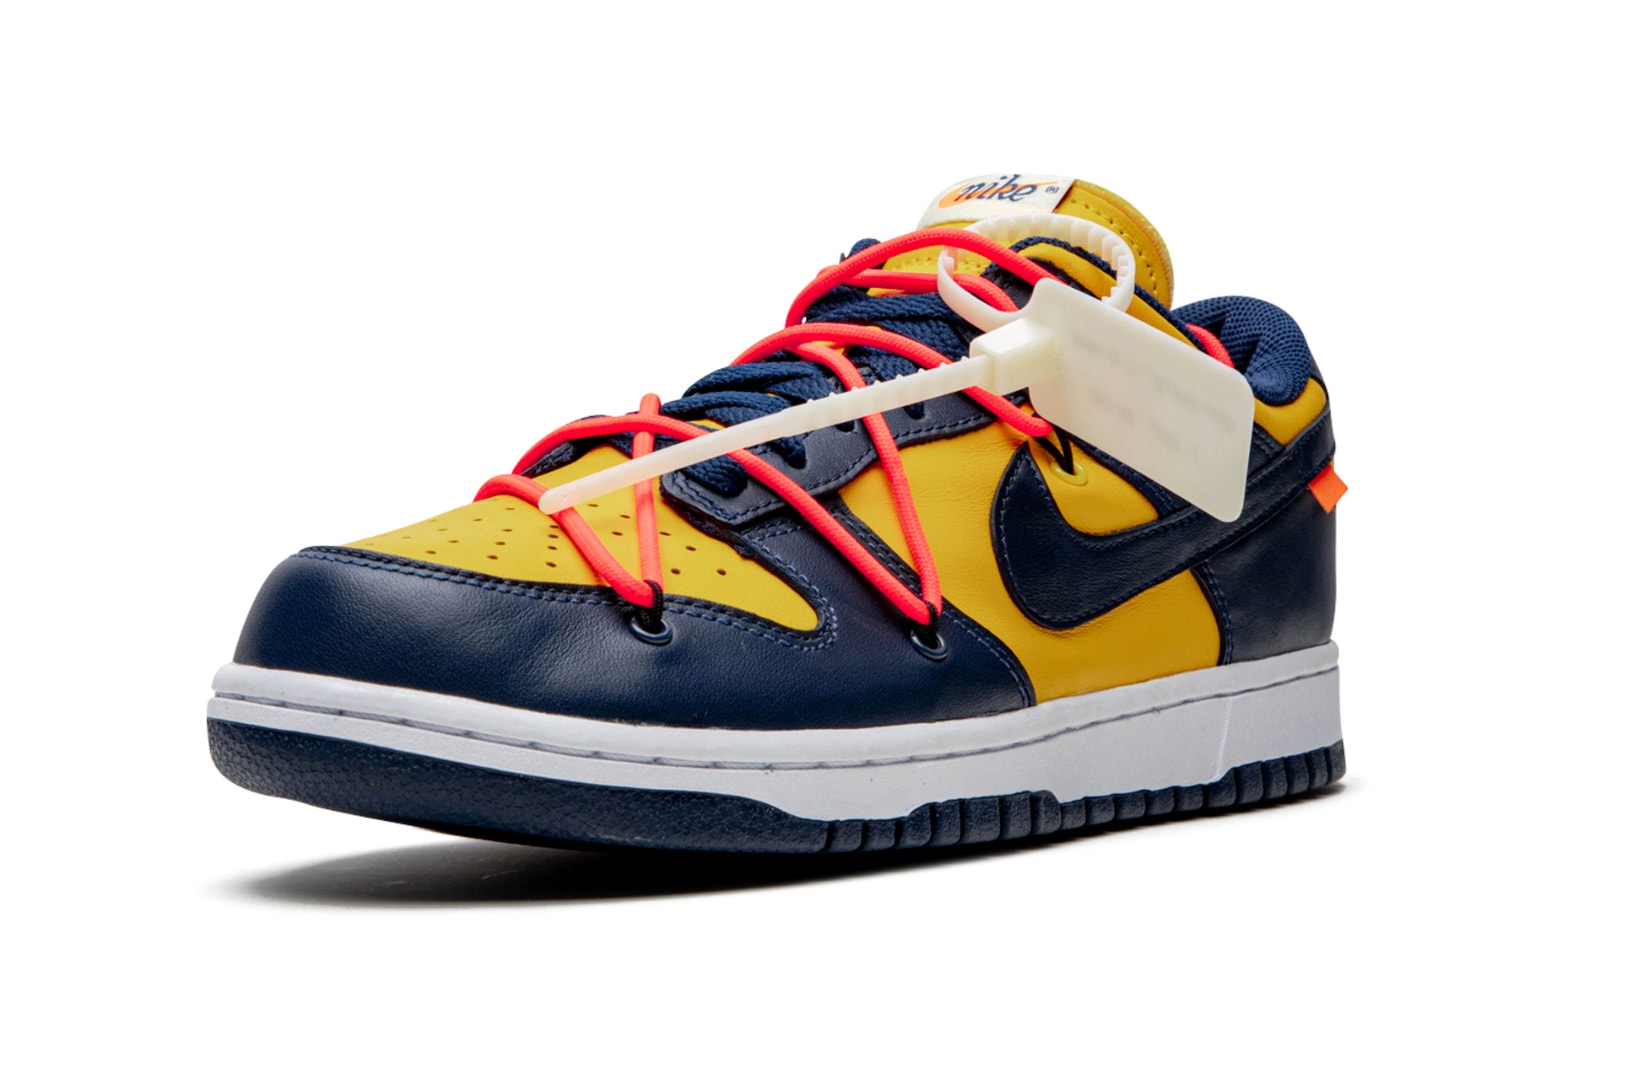 Off-White™ x Nike SB Dunk Low "University Gold" stadium goods virgil abloh closer look better detailed collaborations release info yellow blue navy